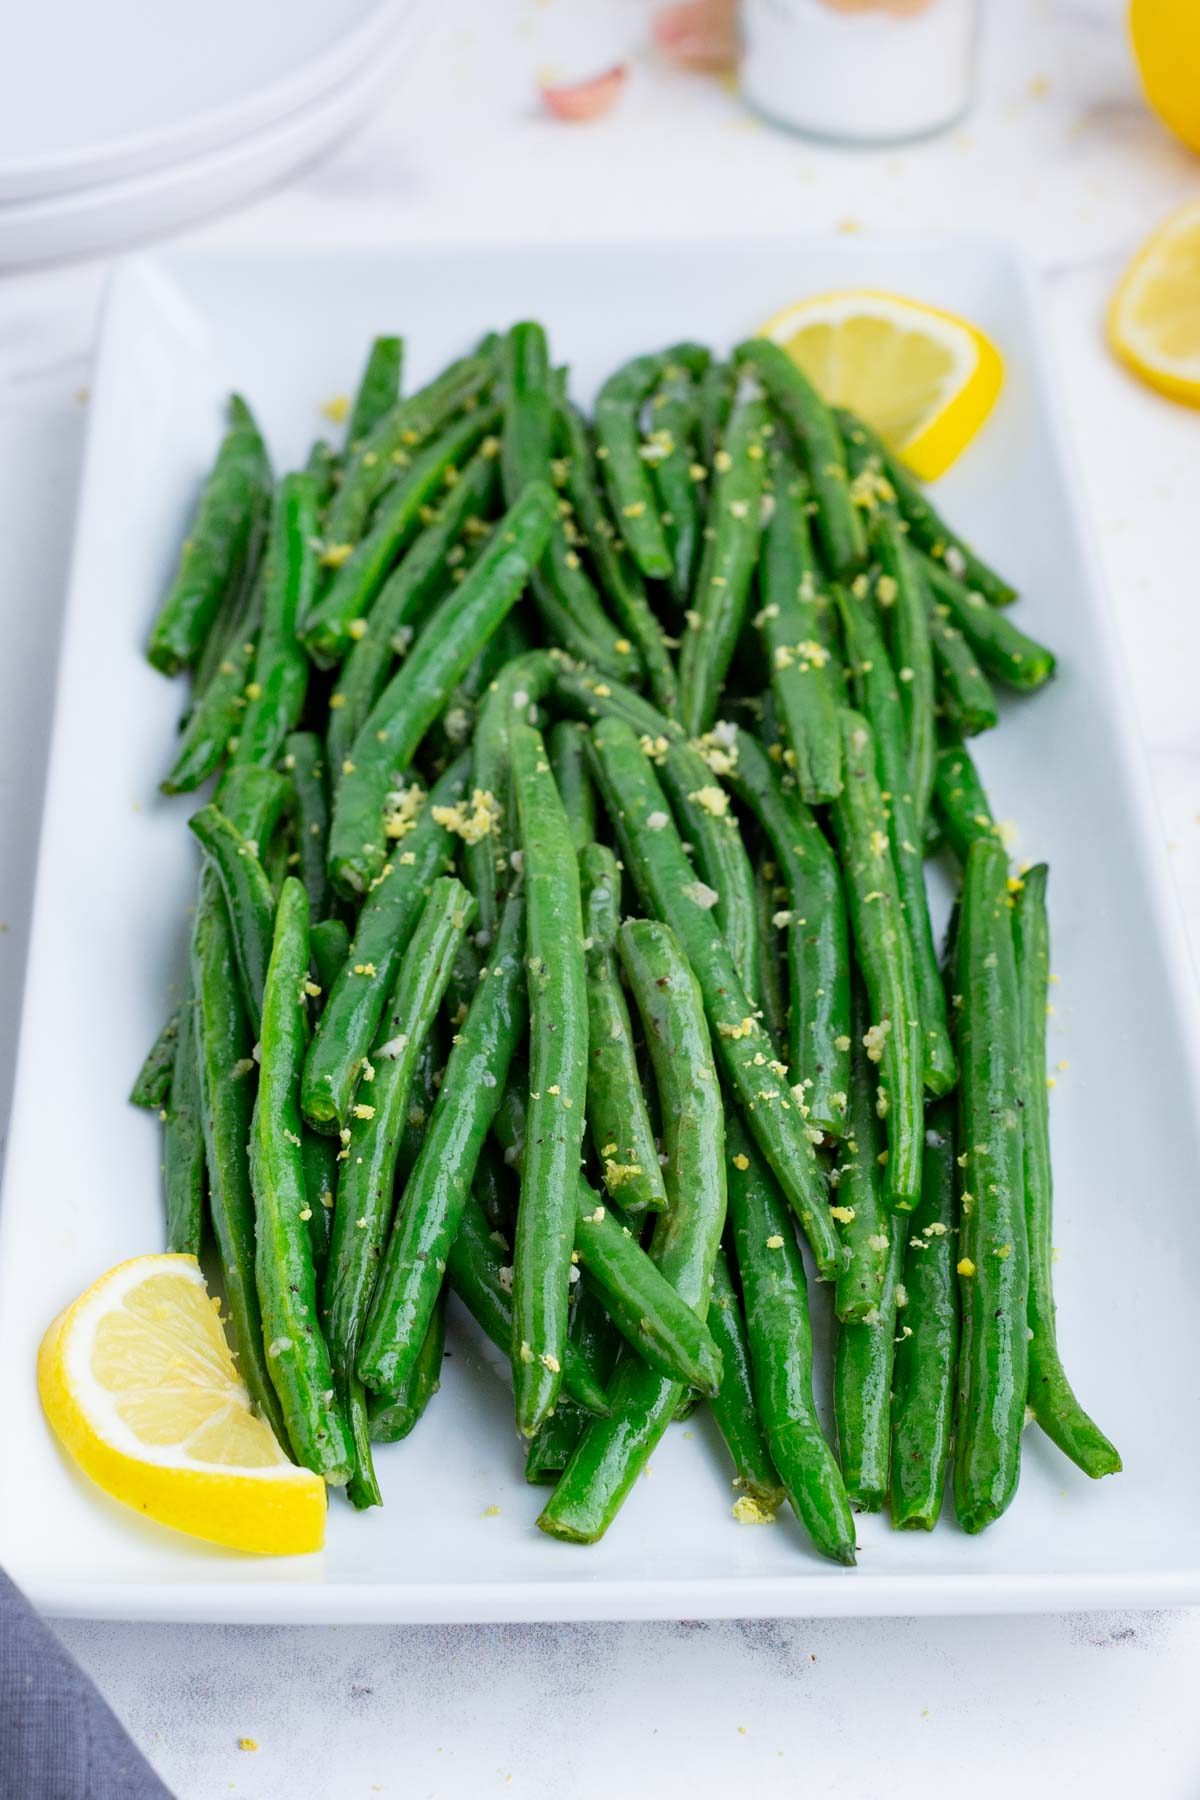 Air fryer green beans are a quick and easy side dish.